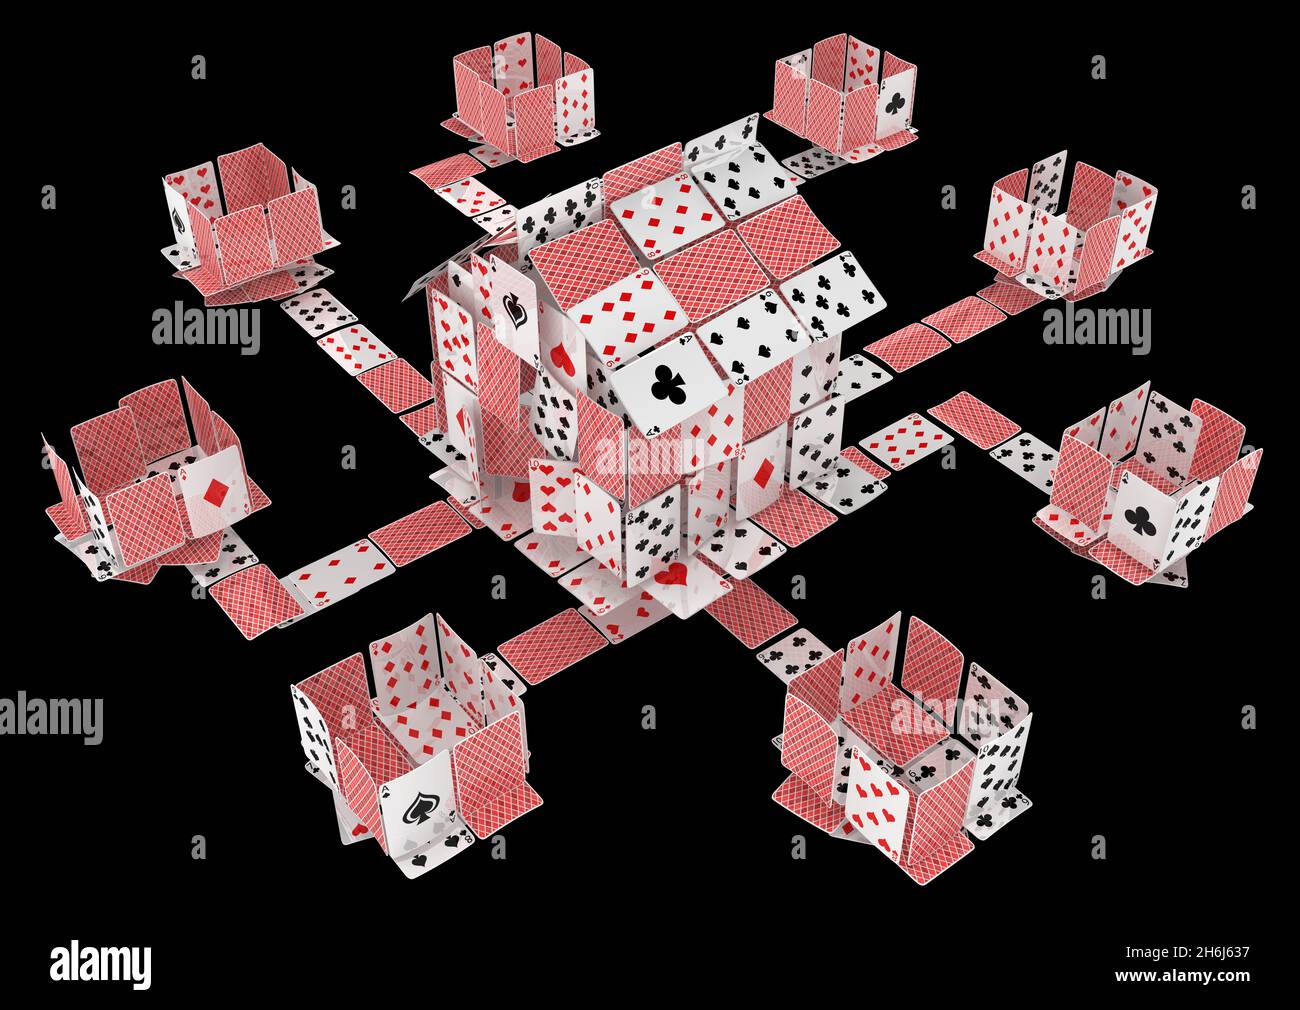 Cards house game gambling abstract outside boxes connected, 3d illustration, horizontal, over black, isolated Stock Photo